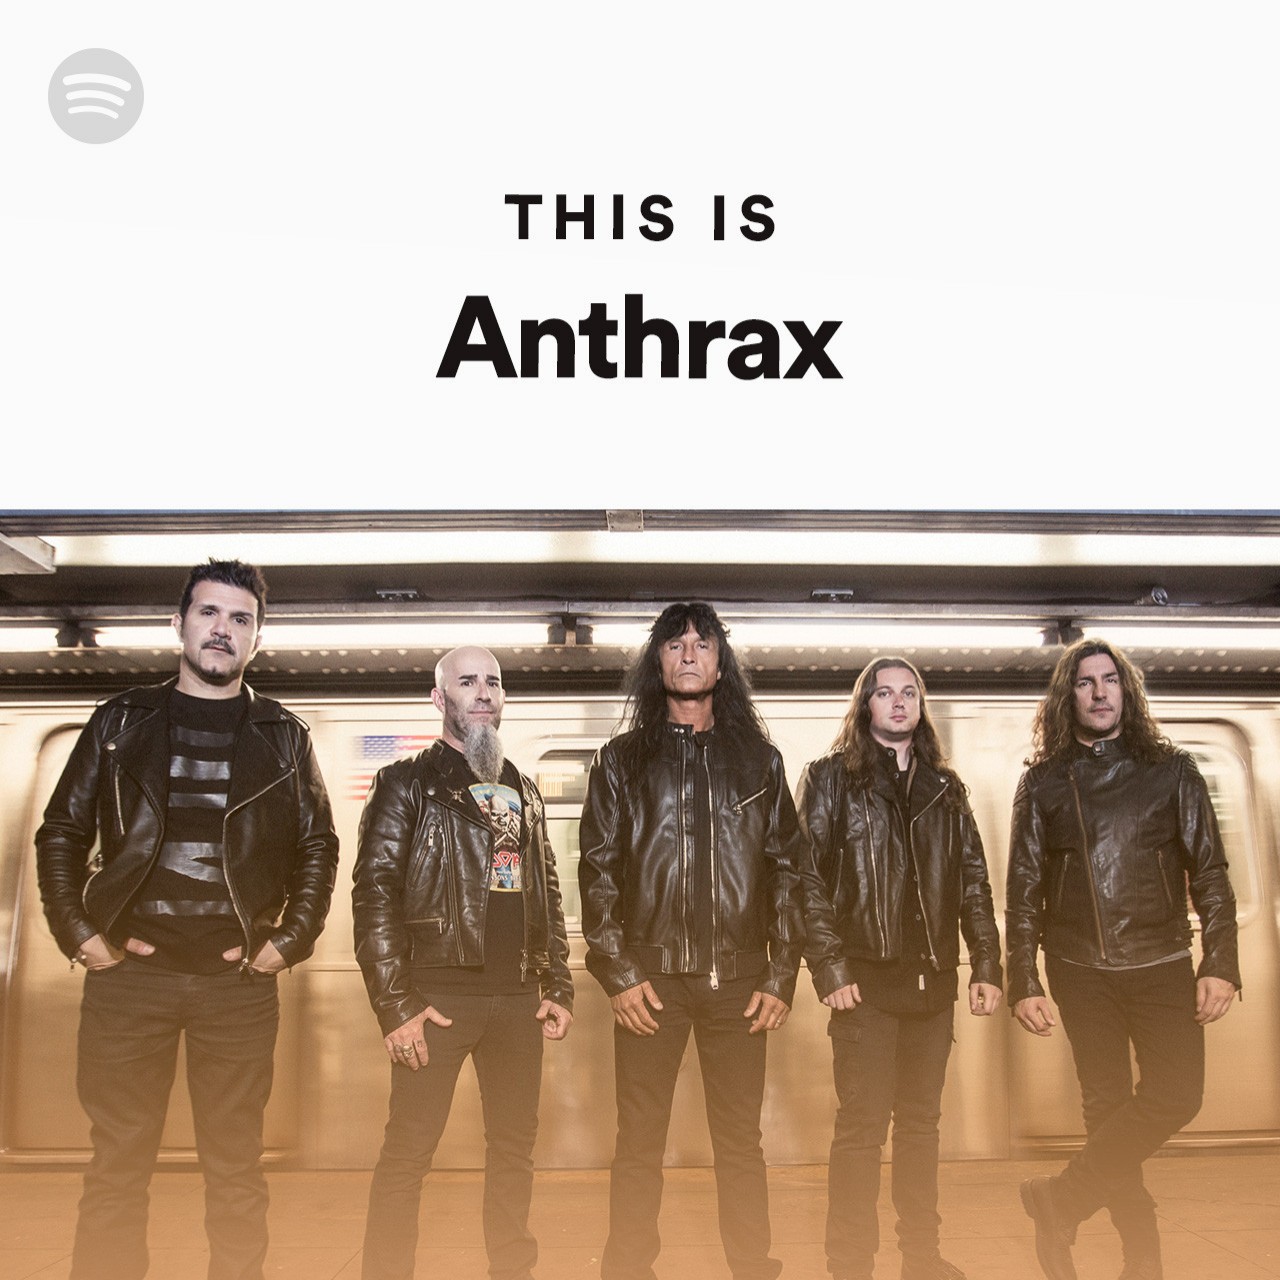 This Is Anthrax